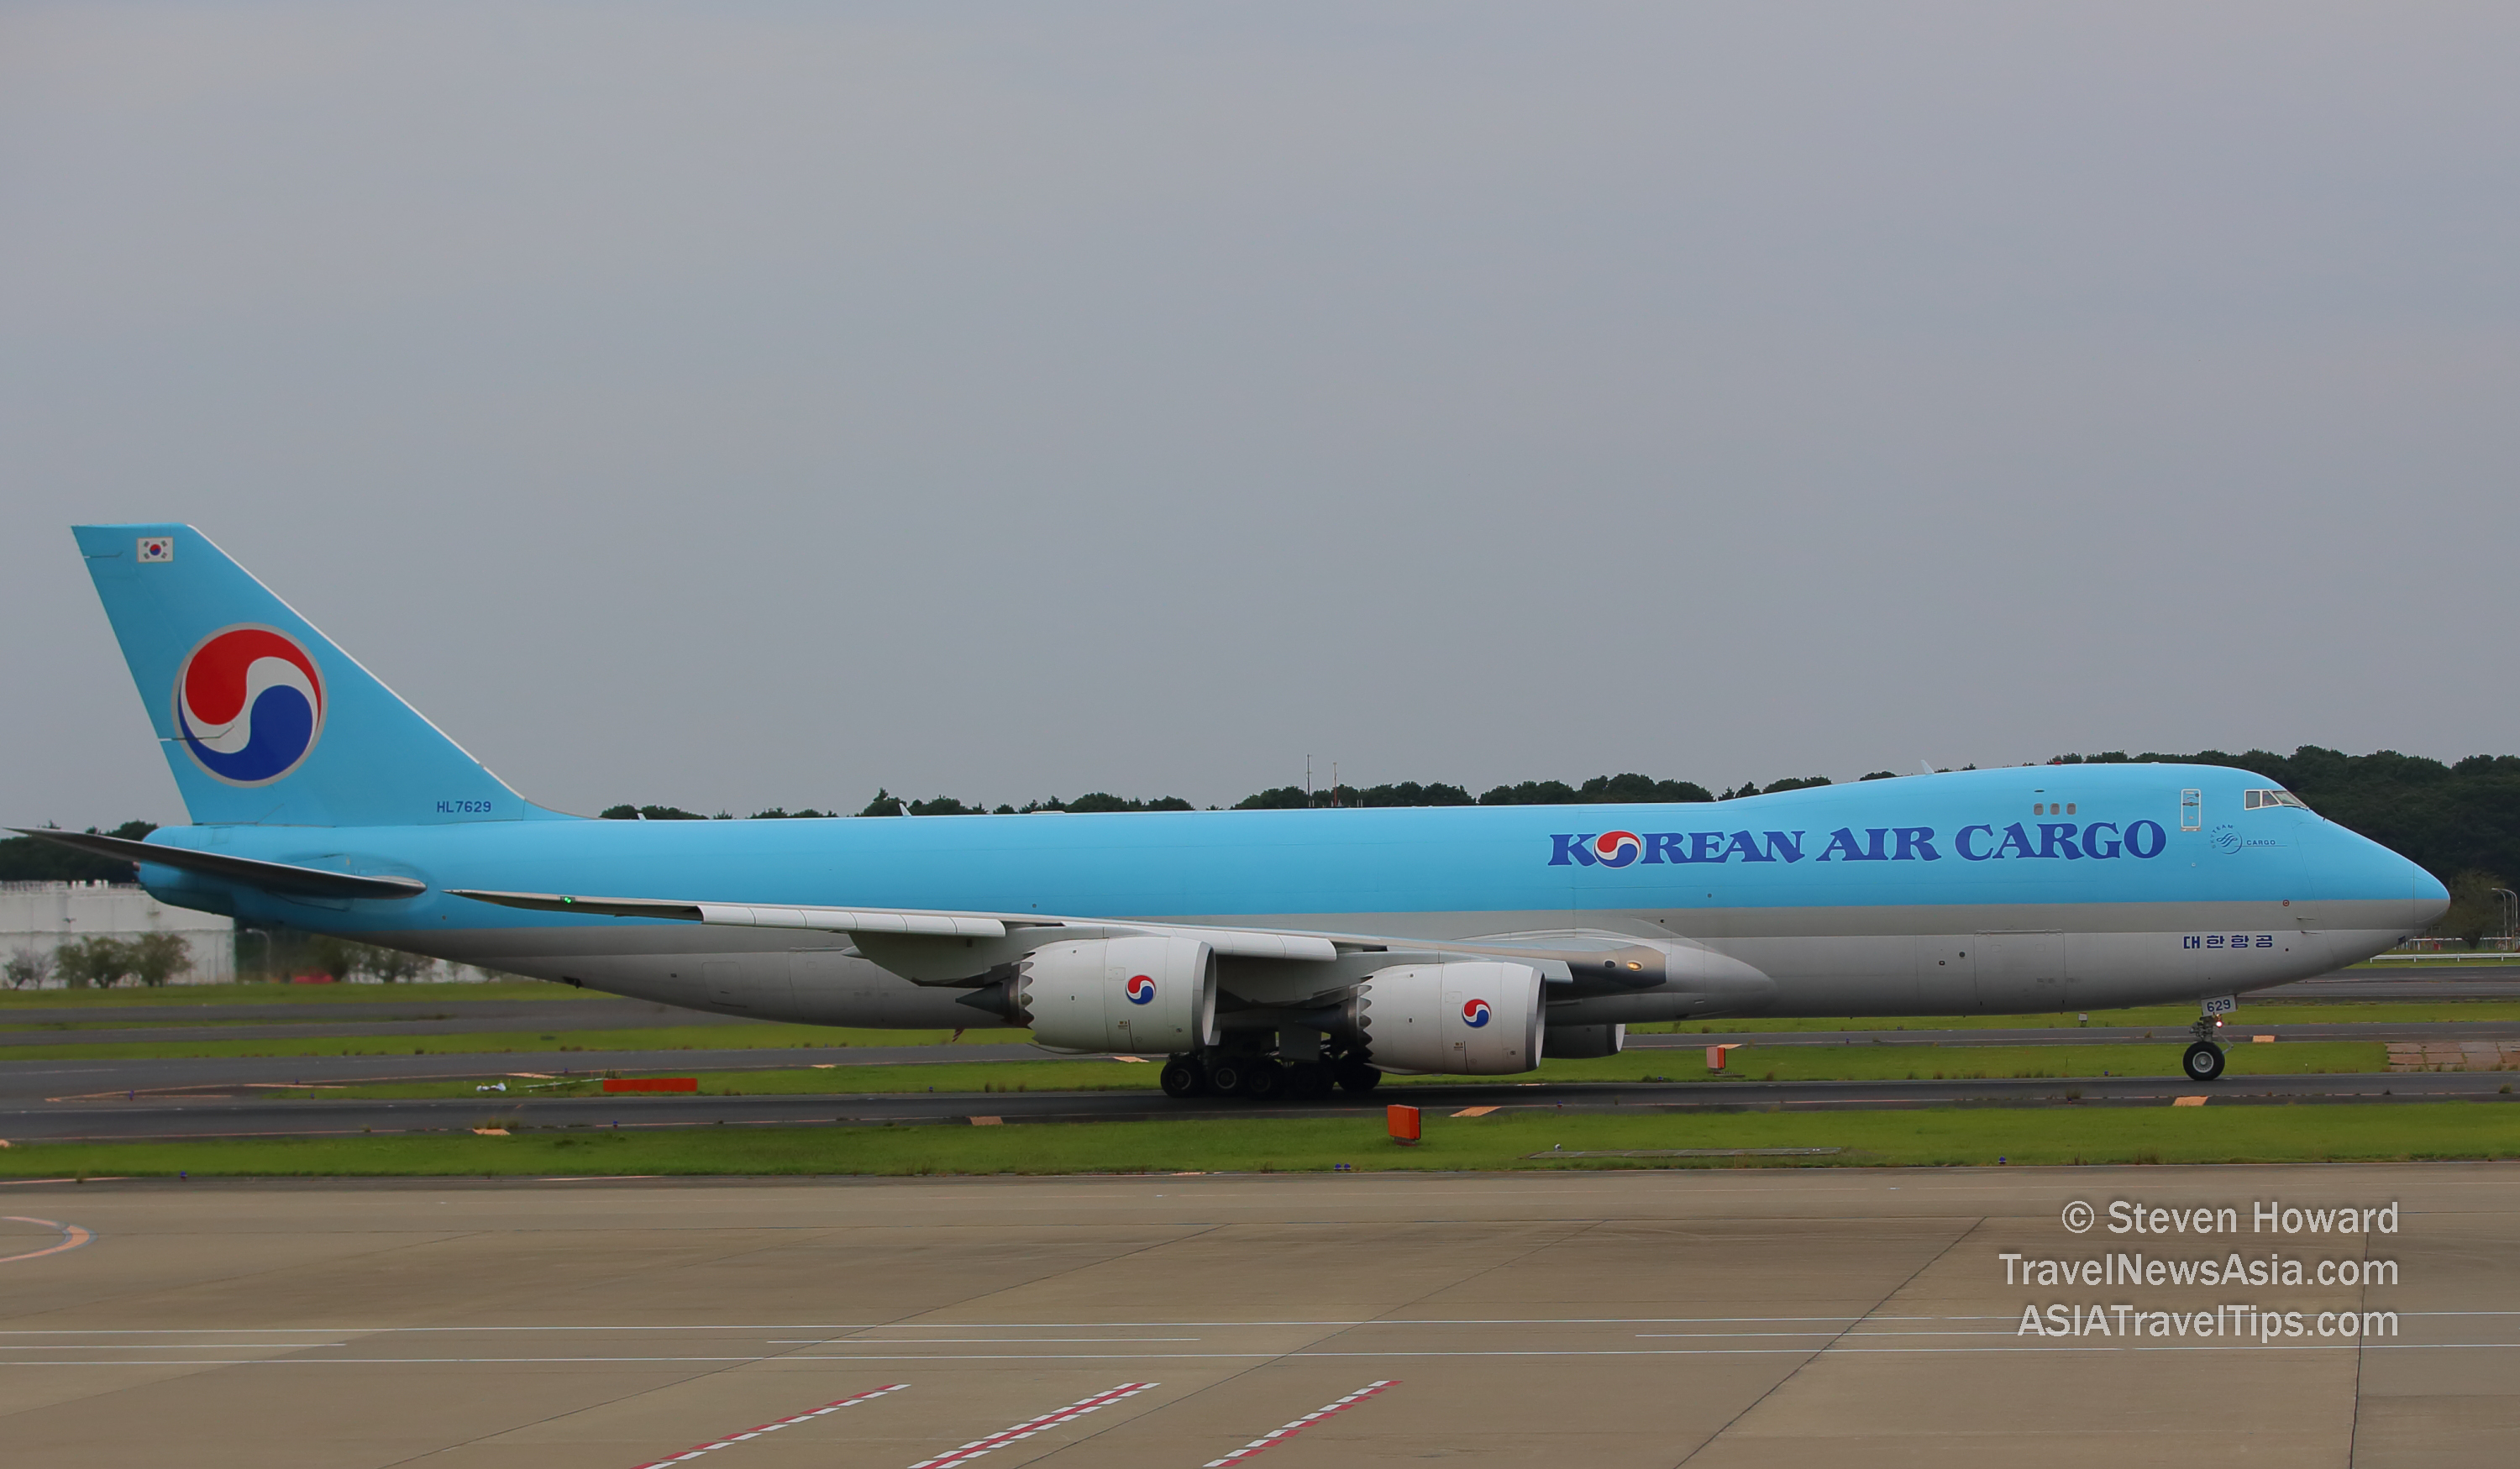 Korean Air Cargo Boeing 747-8F reg: HL7629. Picture by Steven Howard of TravelNewsAsia.com Click to enlarge.